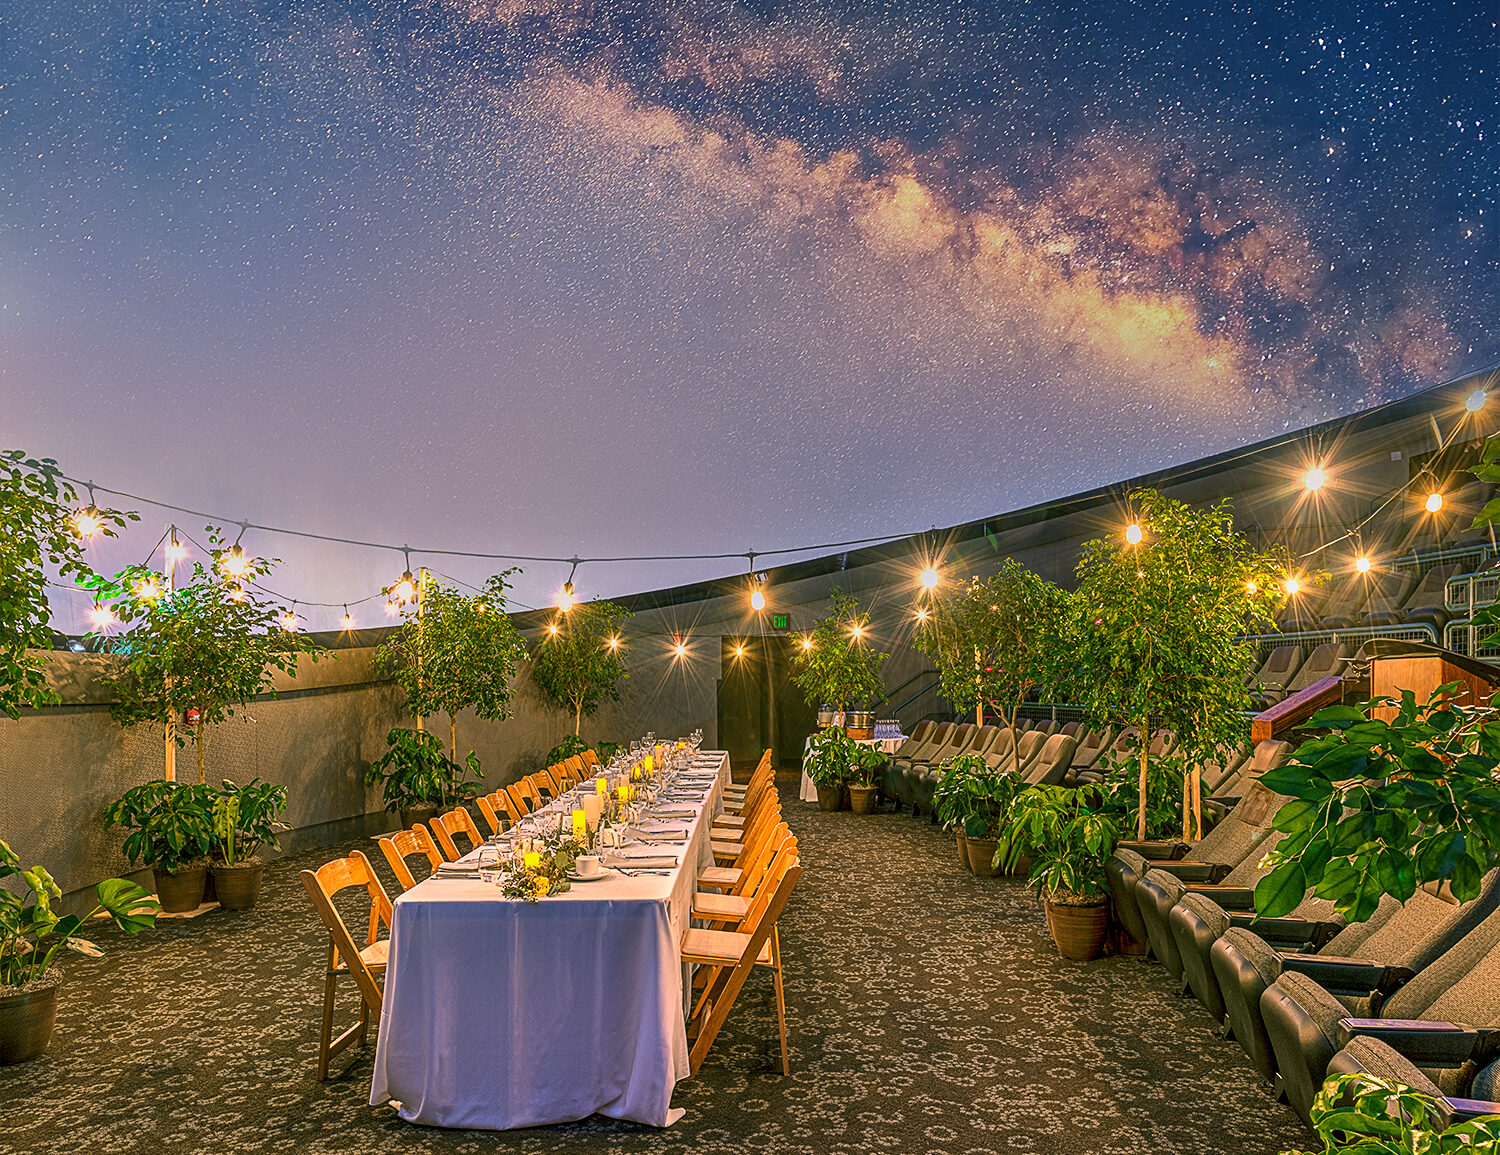 This week in Baton Rouge Dinner under the stars, a Mardi Gras pre